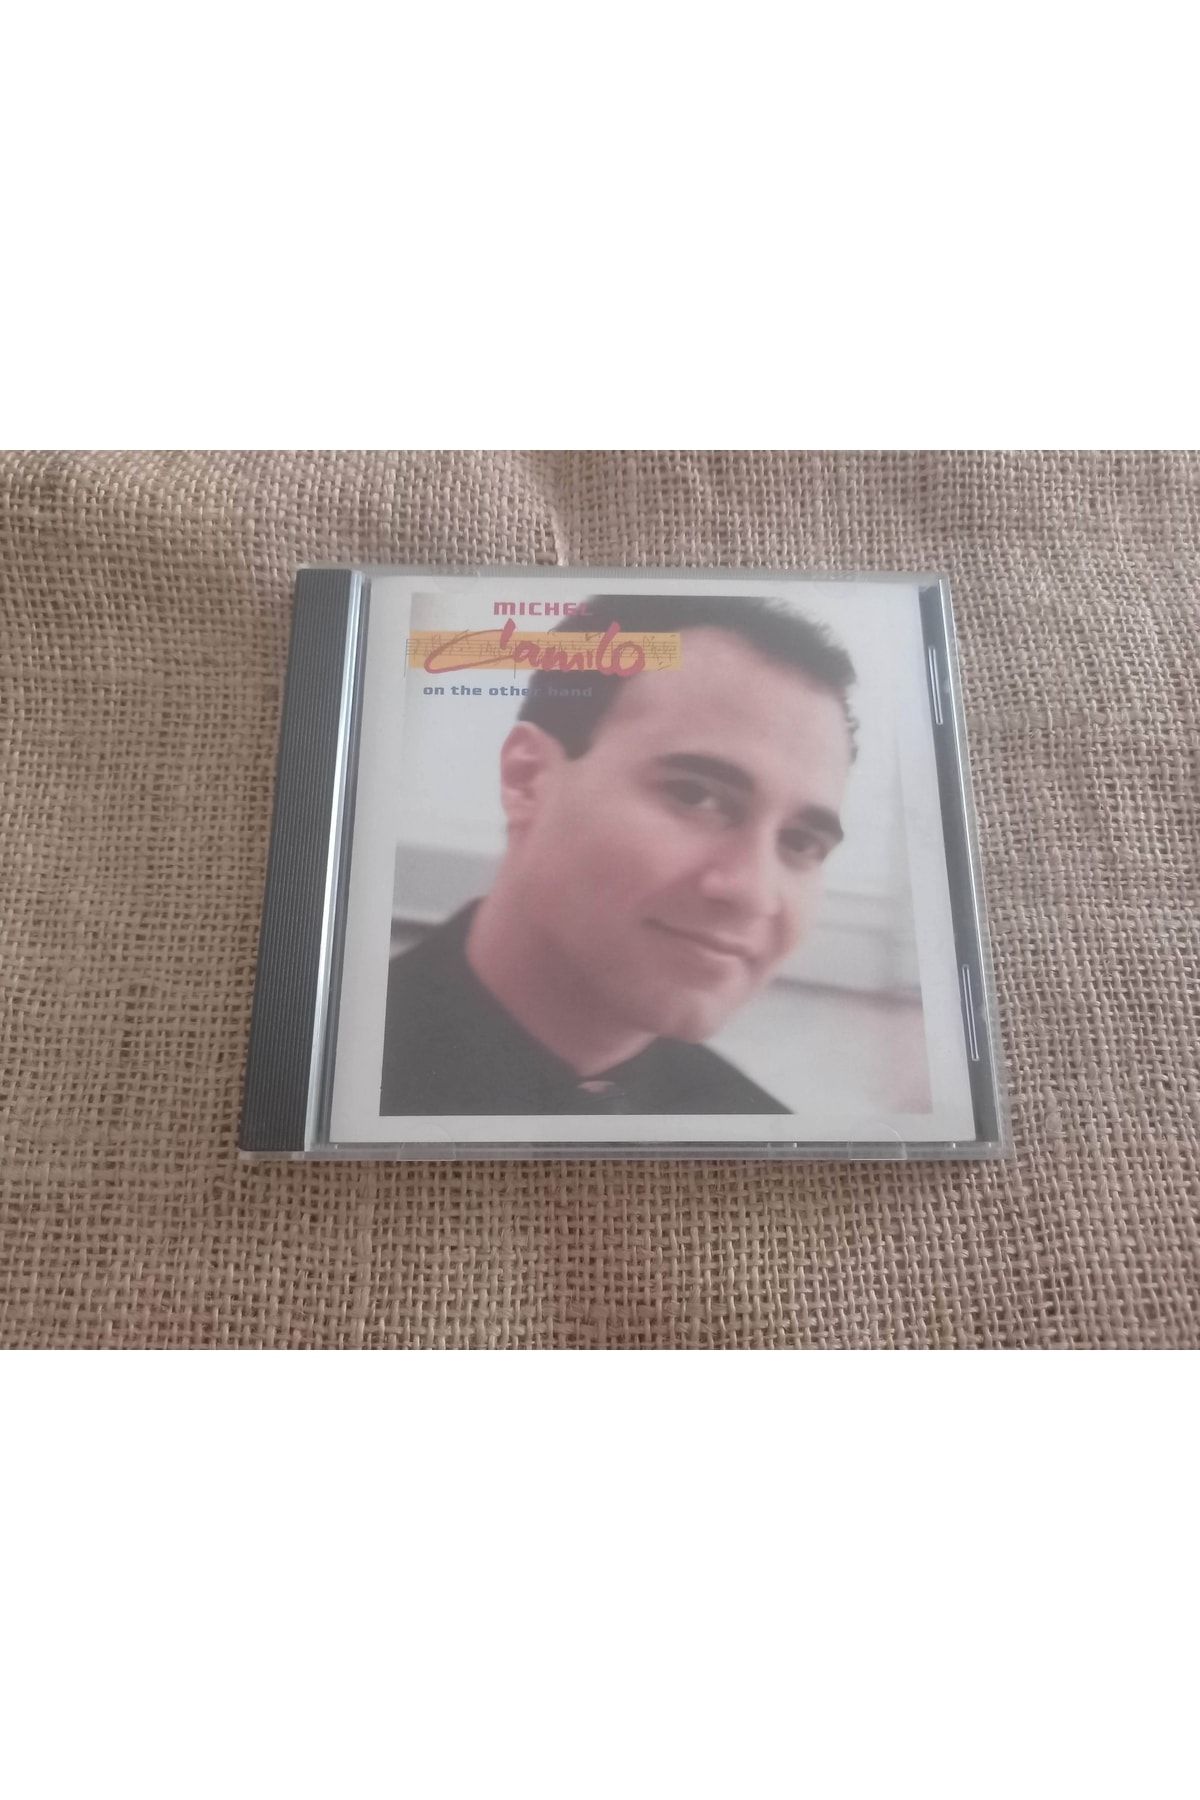 Epic Michel Camilo Cd* On The Other Hand